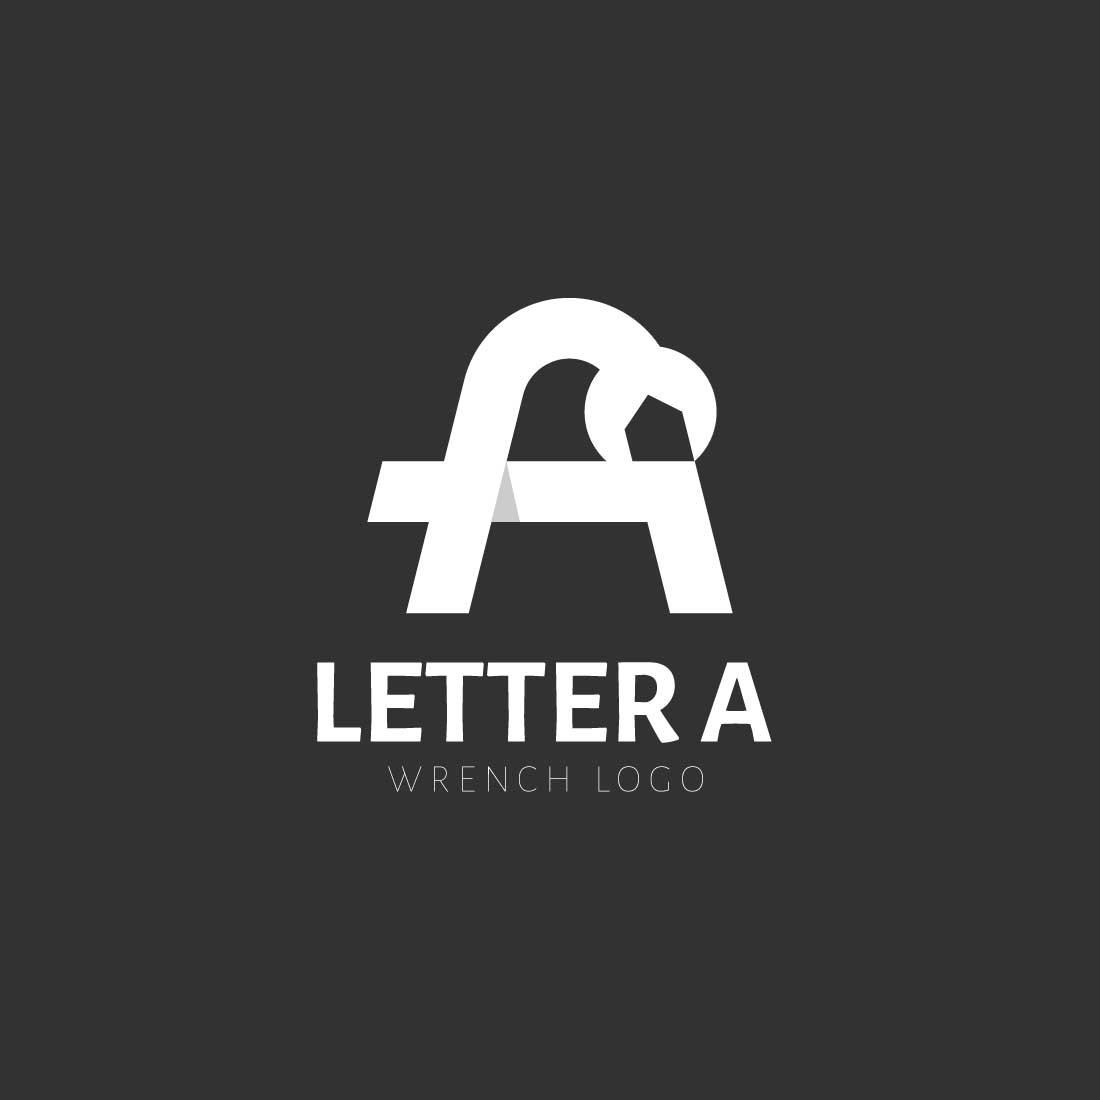 Letter A wrench initials logo cover image.